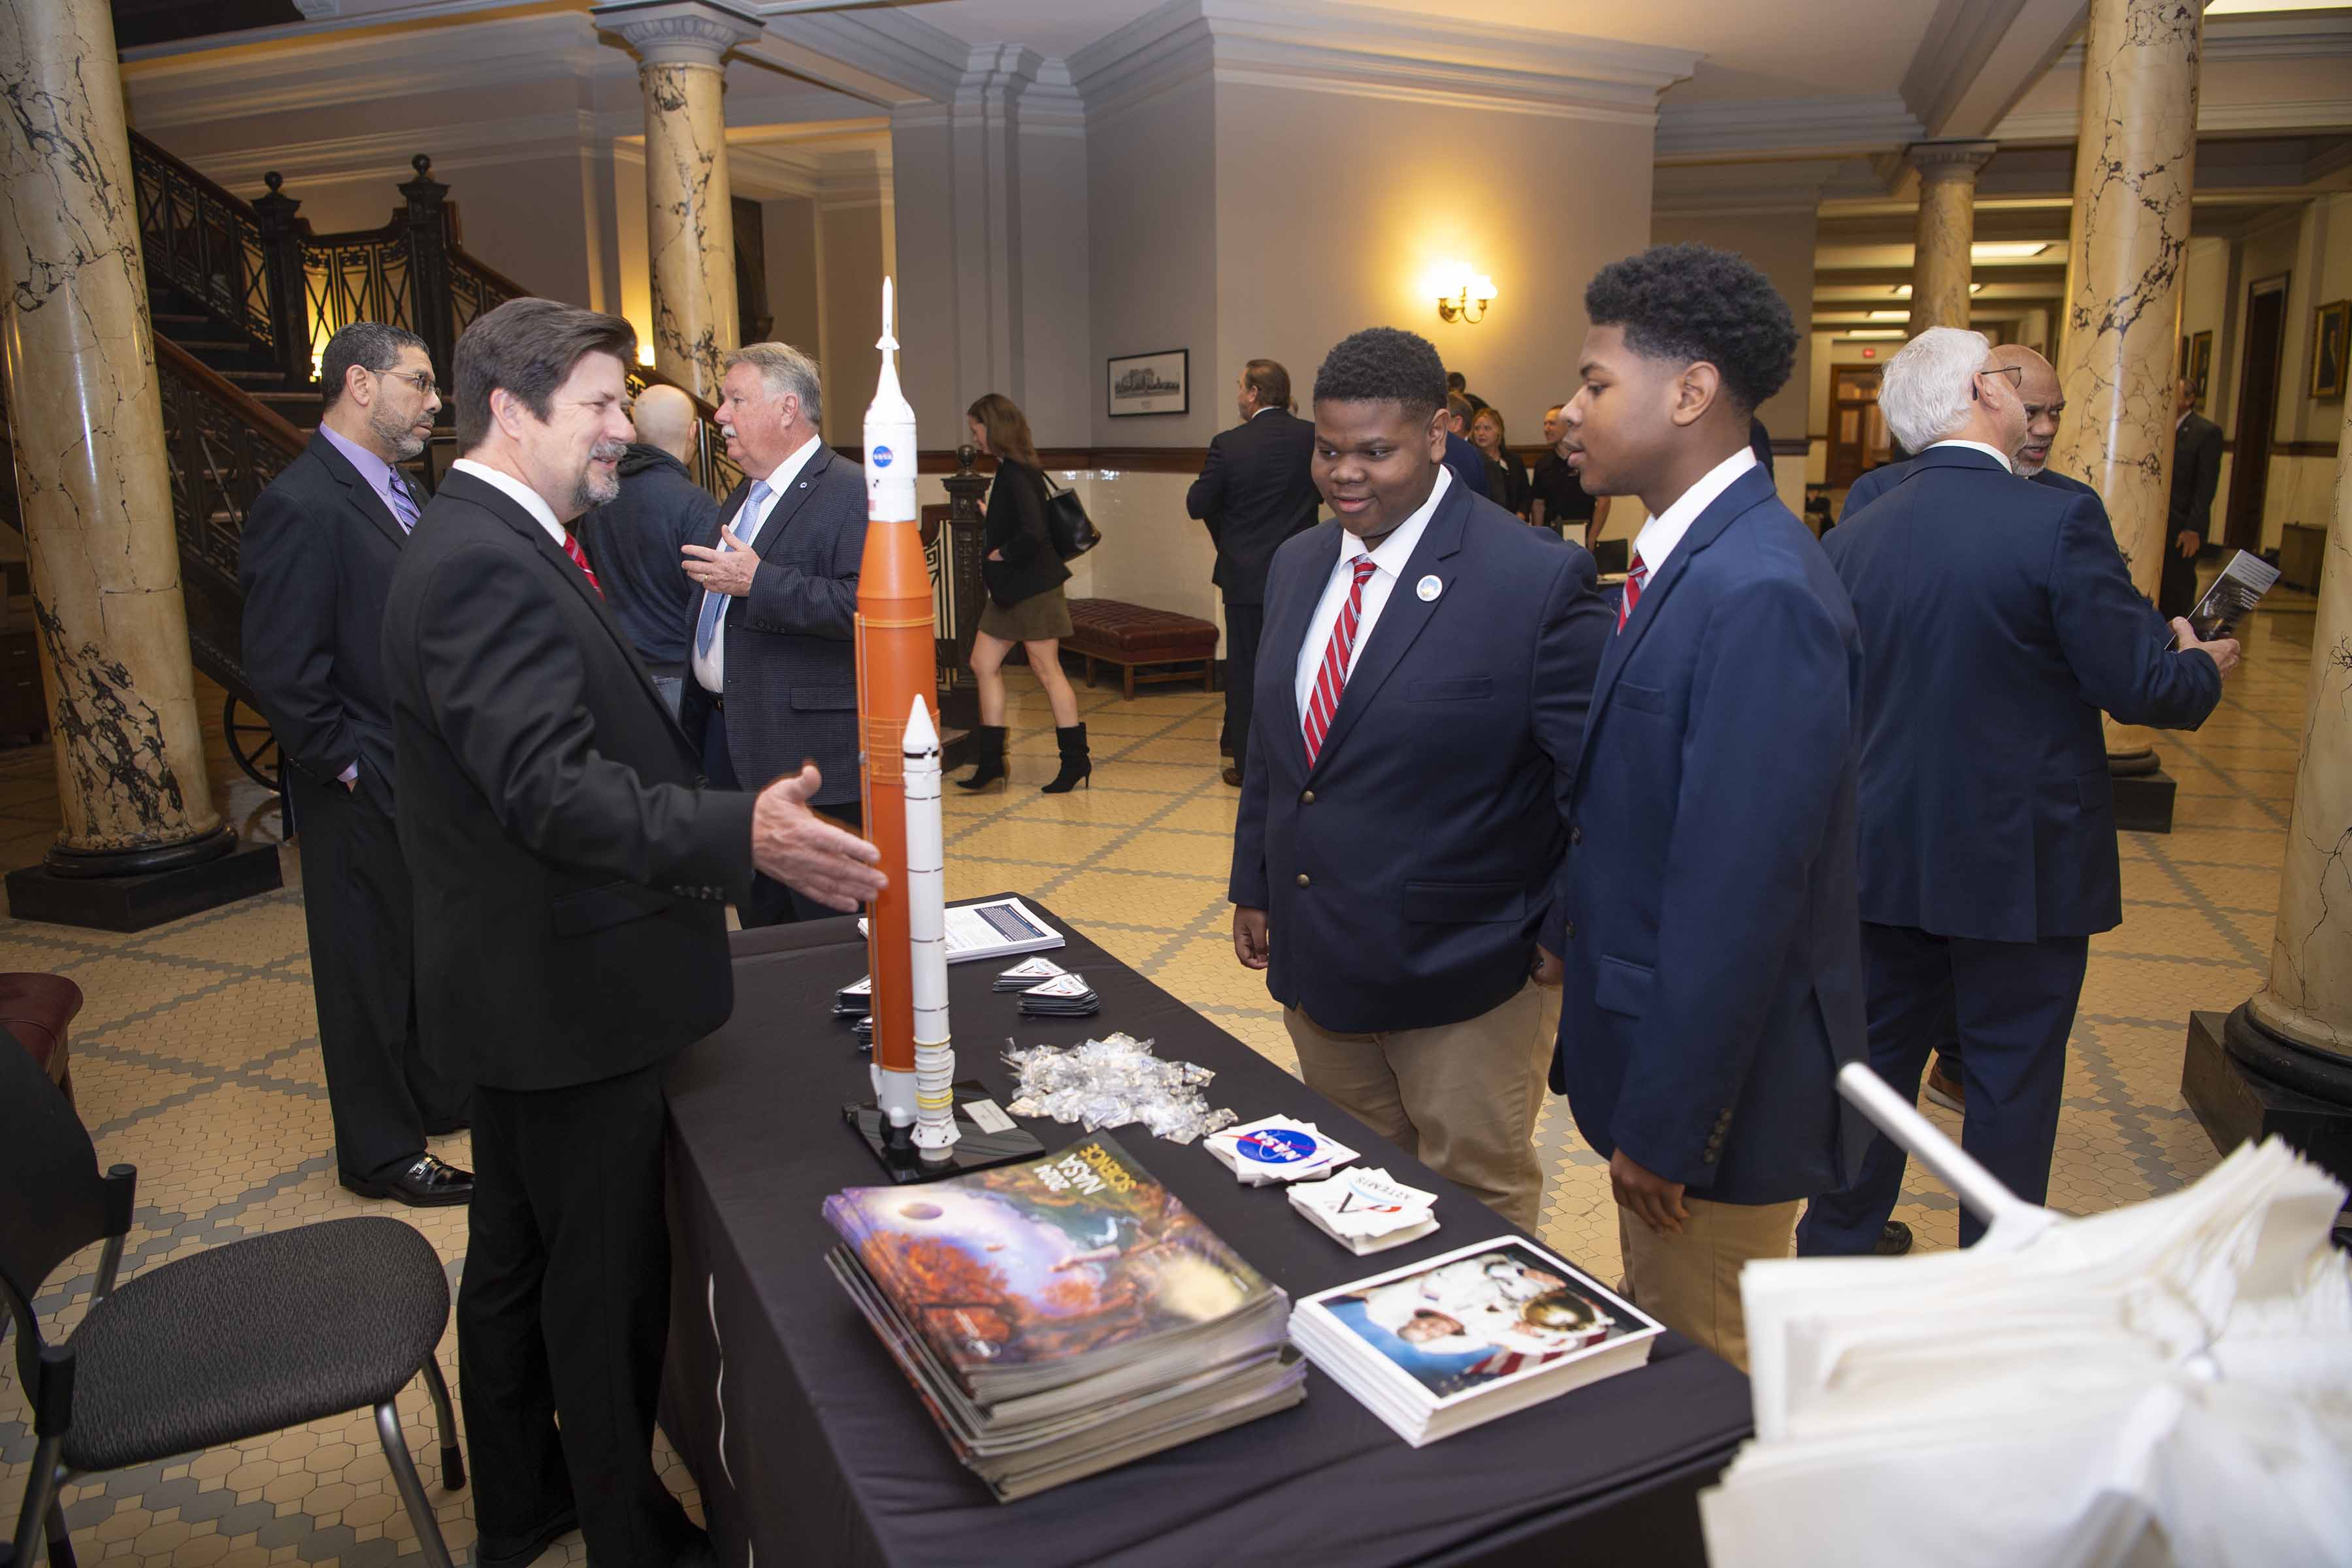 NASA Stennis Safety and Mission Assurance Director Gary Benton speaks with students serving as legislative pages